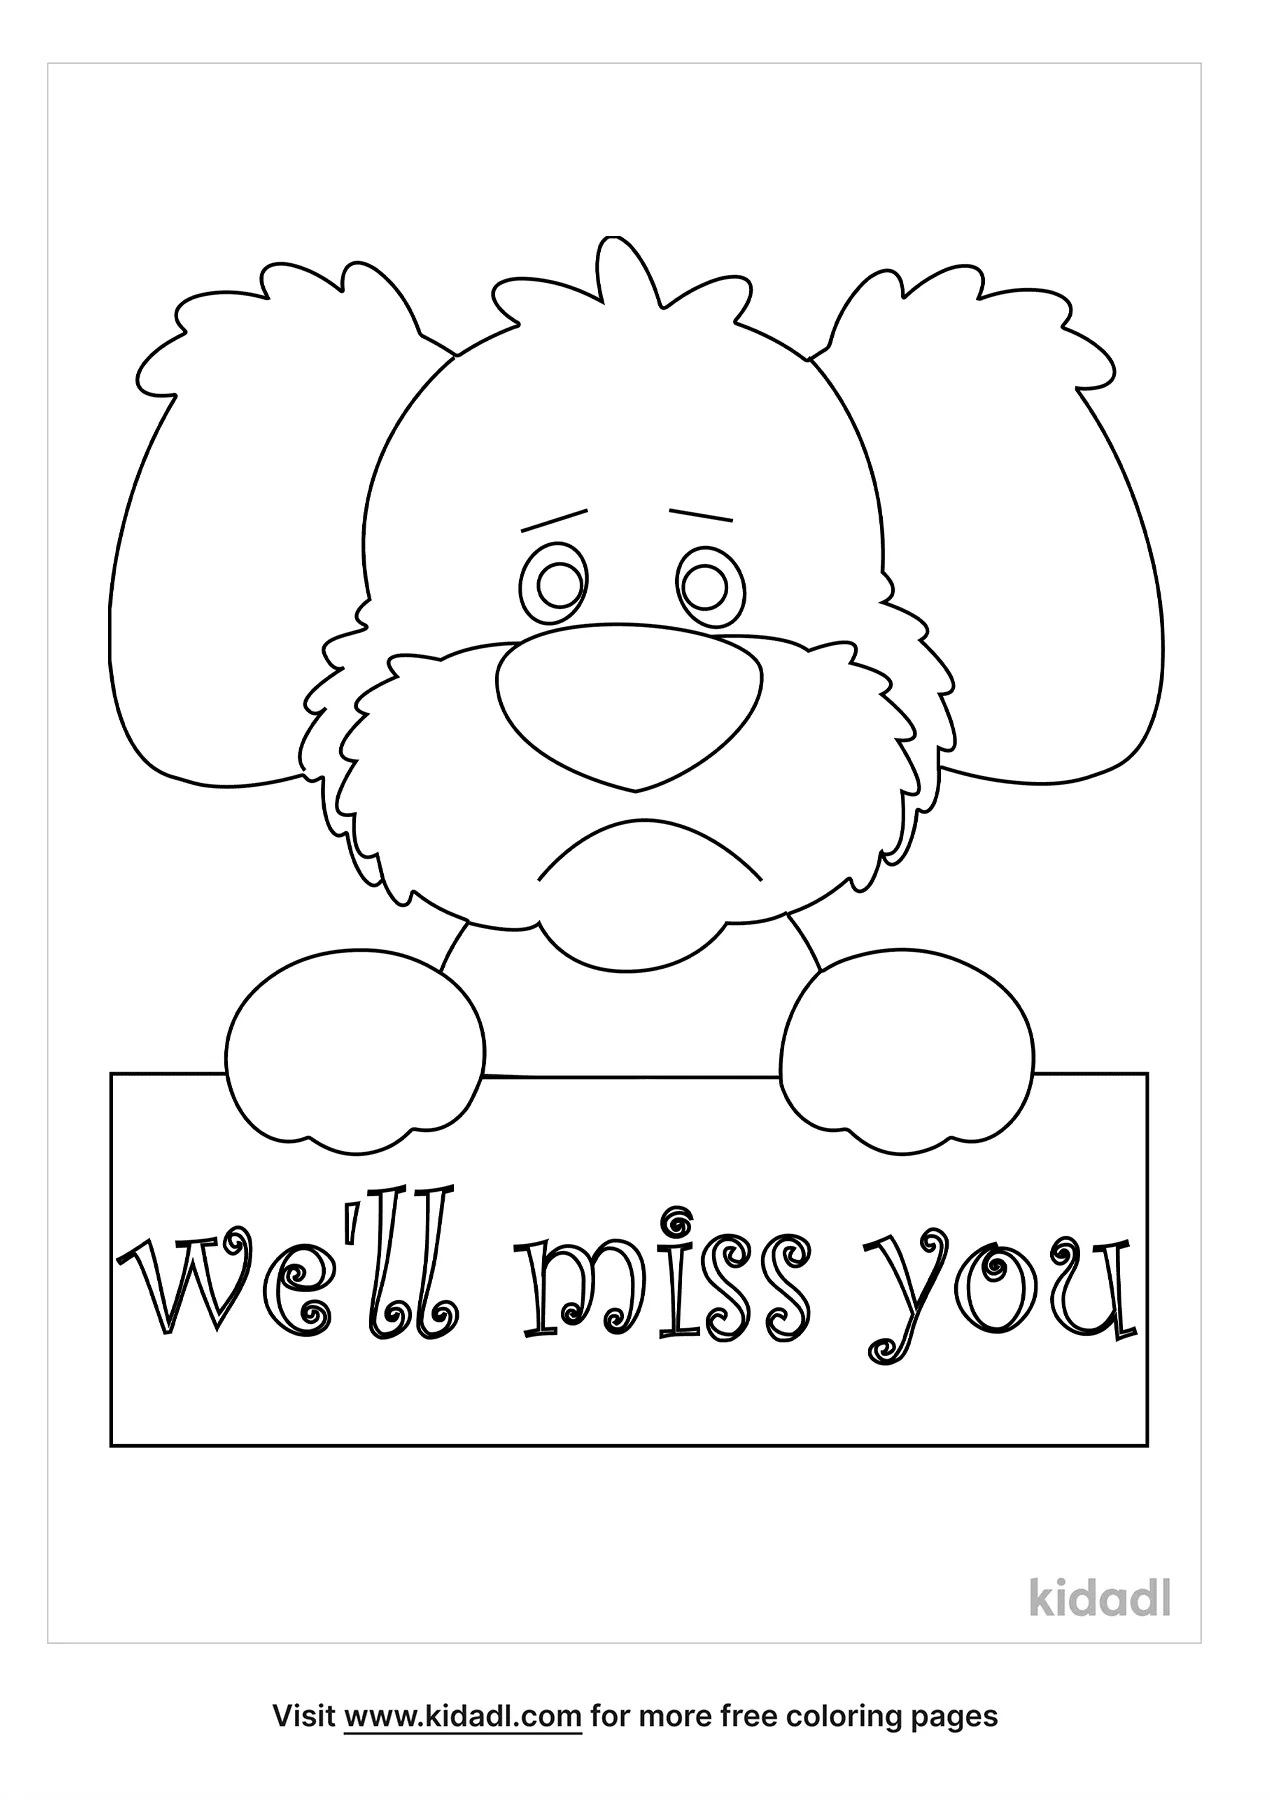 Free well miss you coloring page coloring page printables